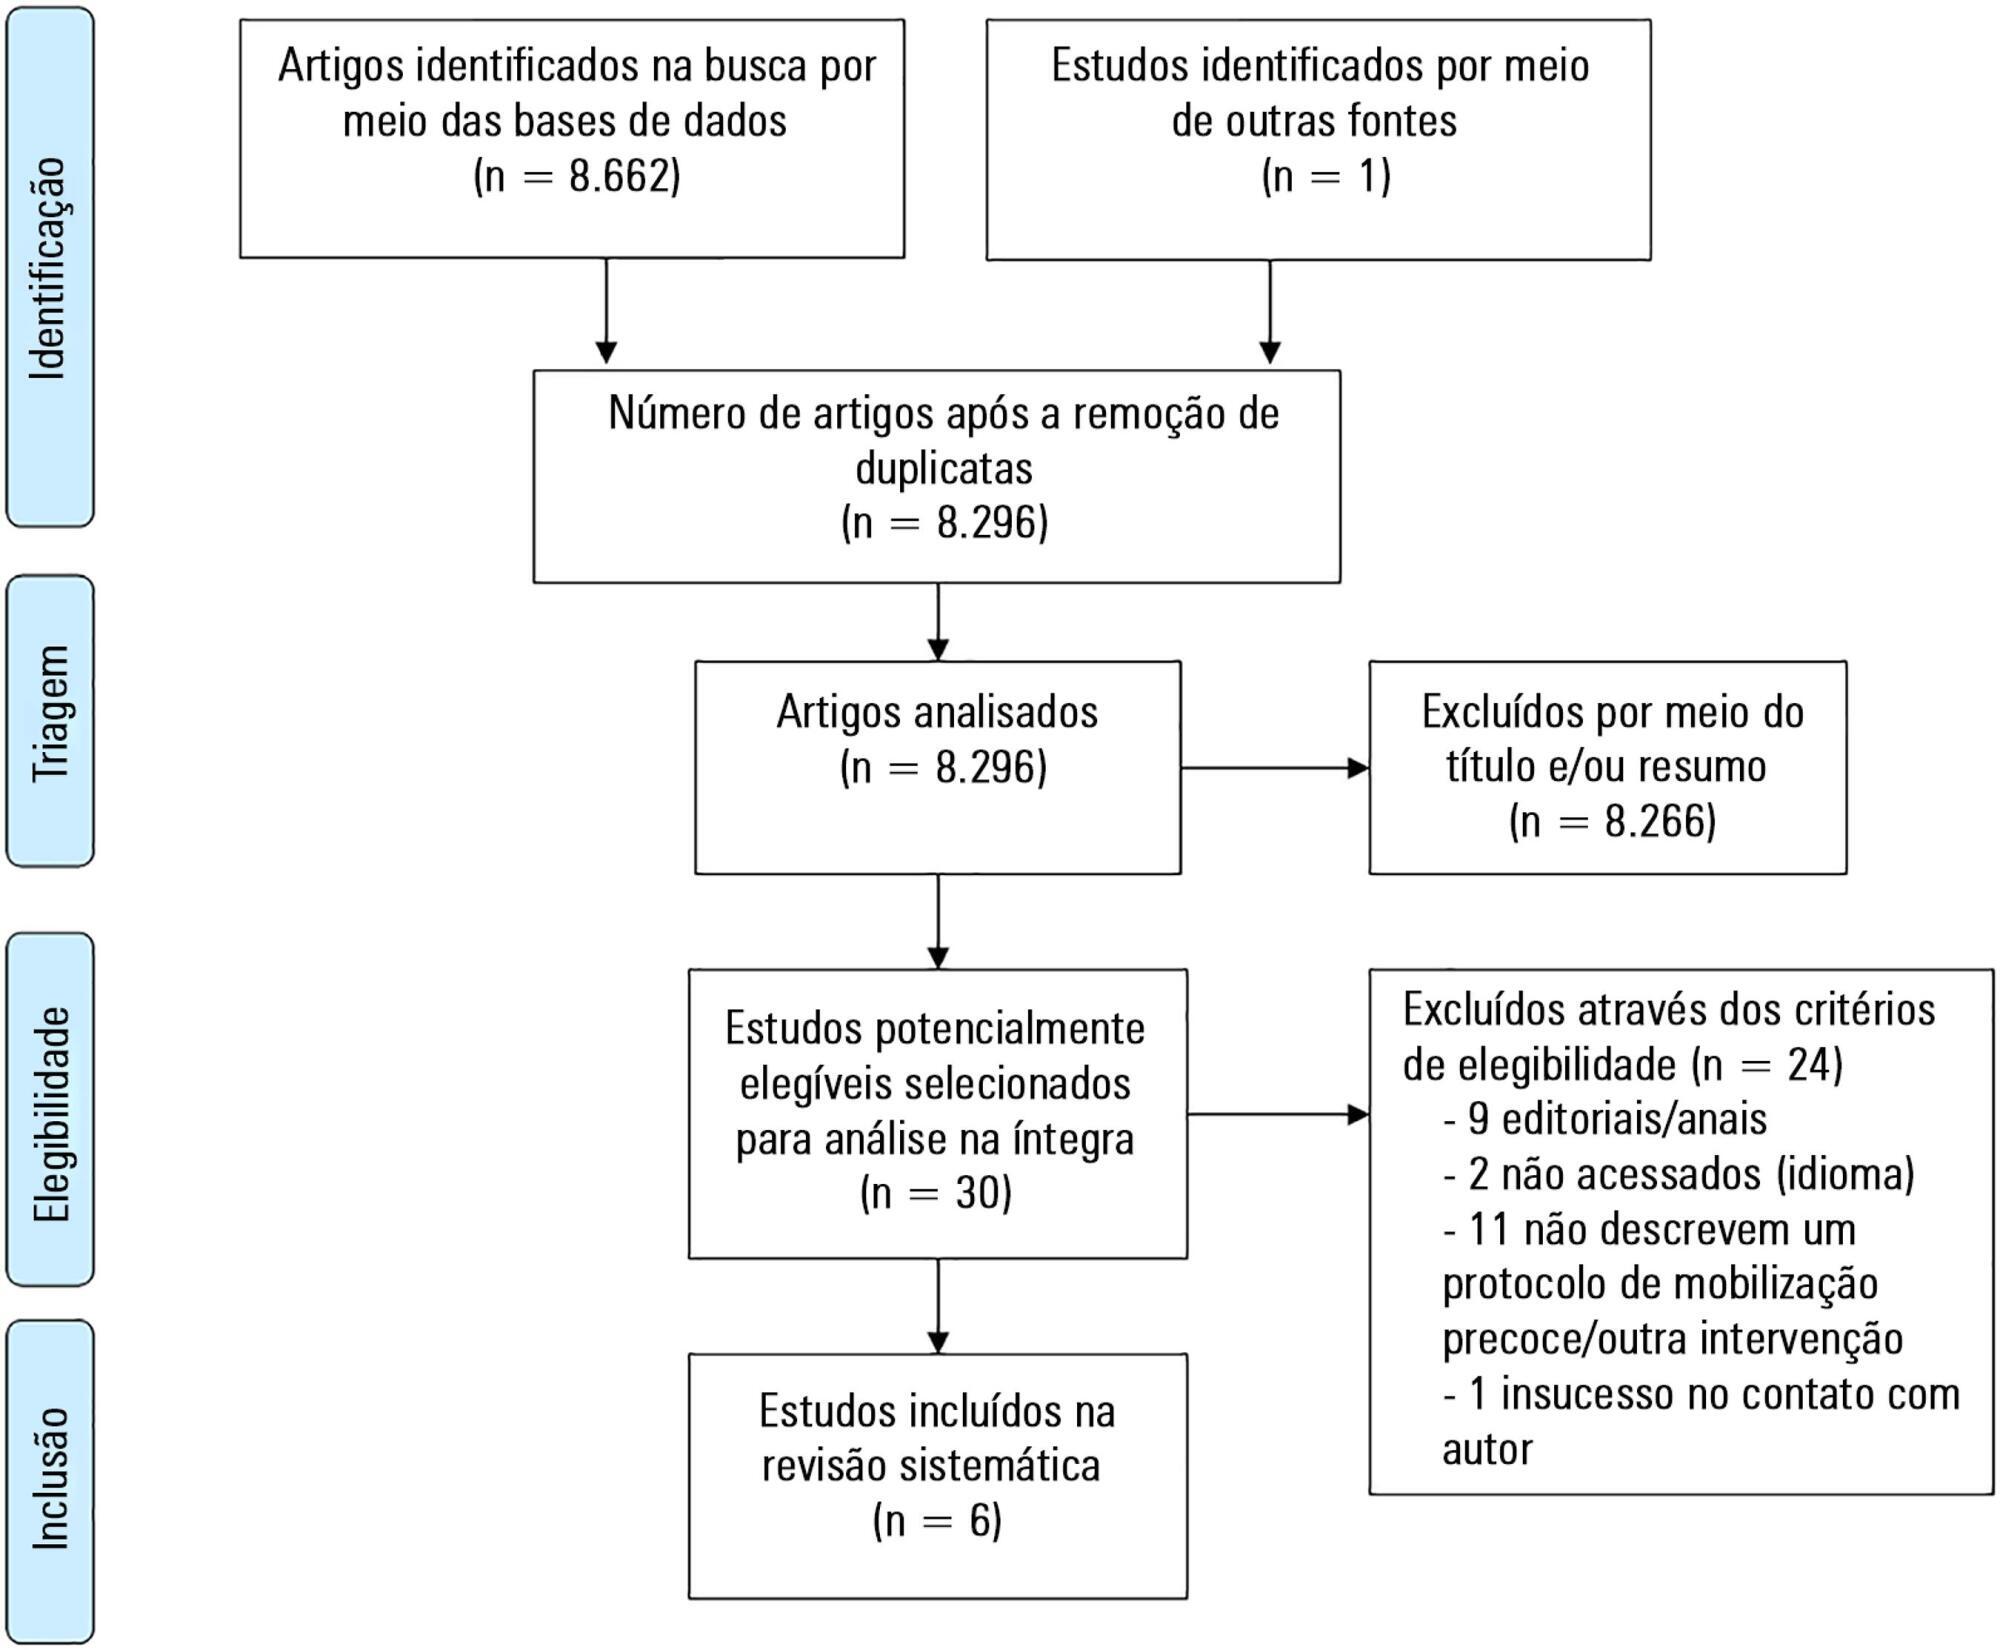 Early mobilization protocols for critically ill pediatric patients: systematic review